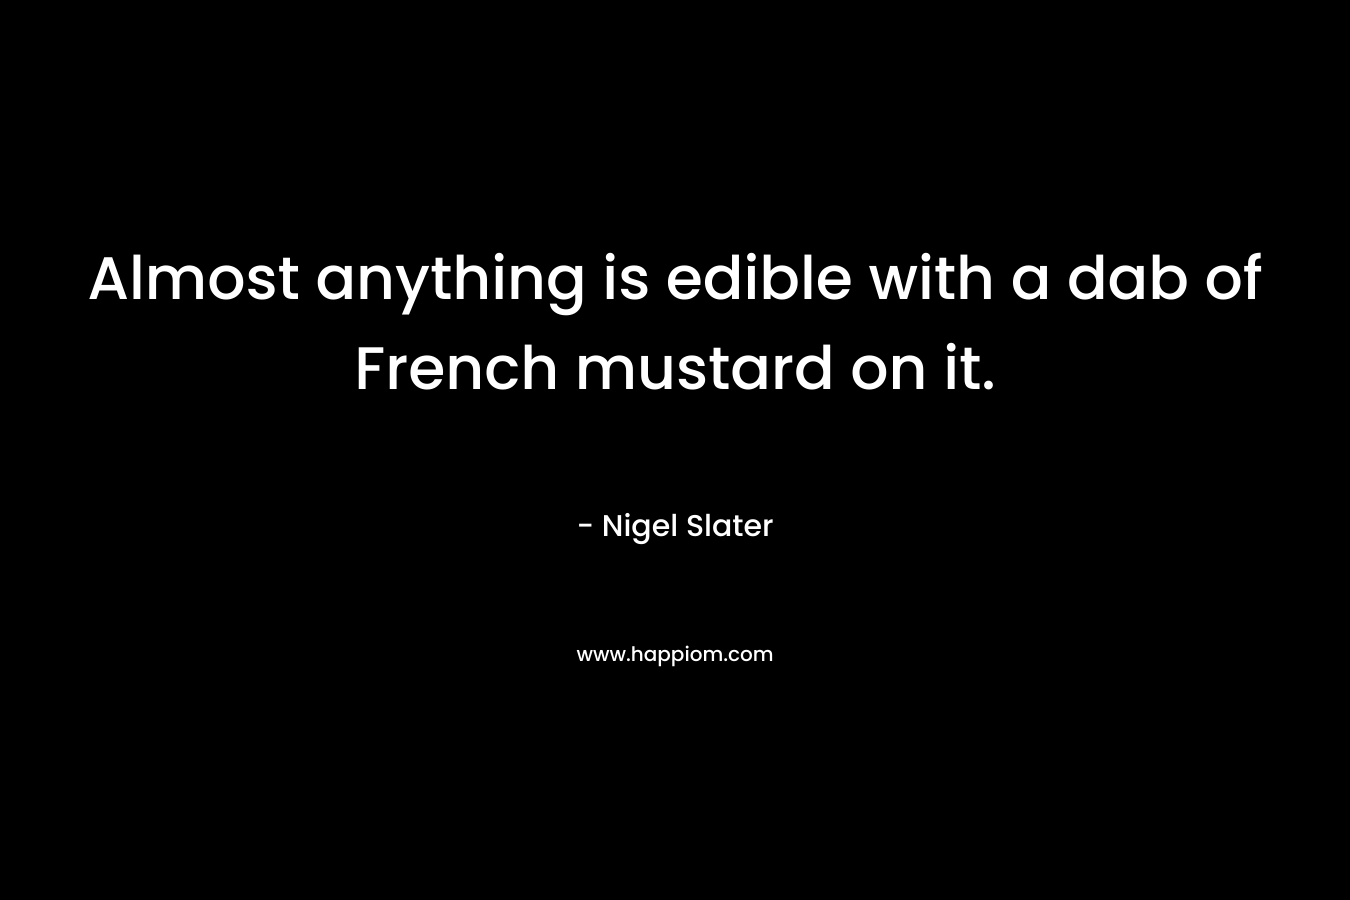 Almost anything is edible with a dab of French mustard on it. – Nigel Slater